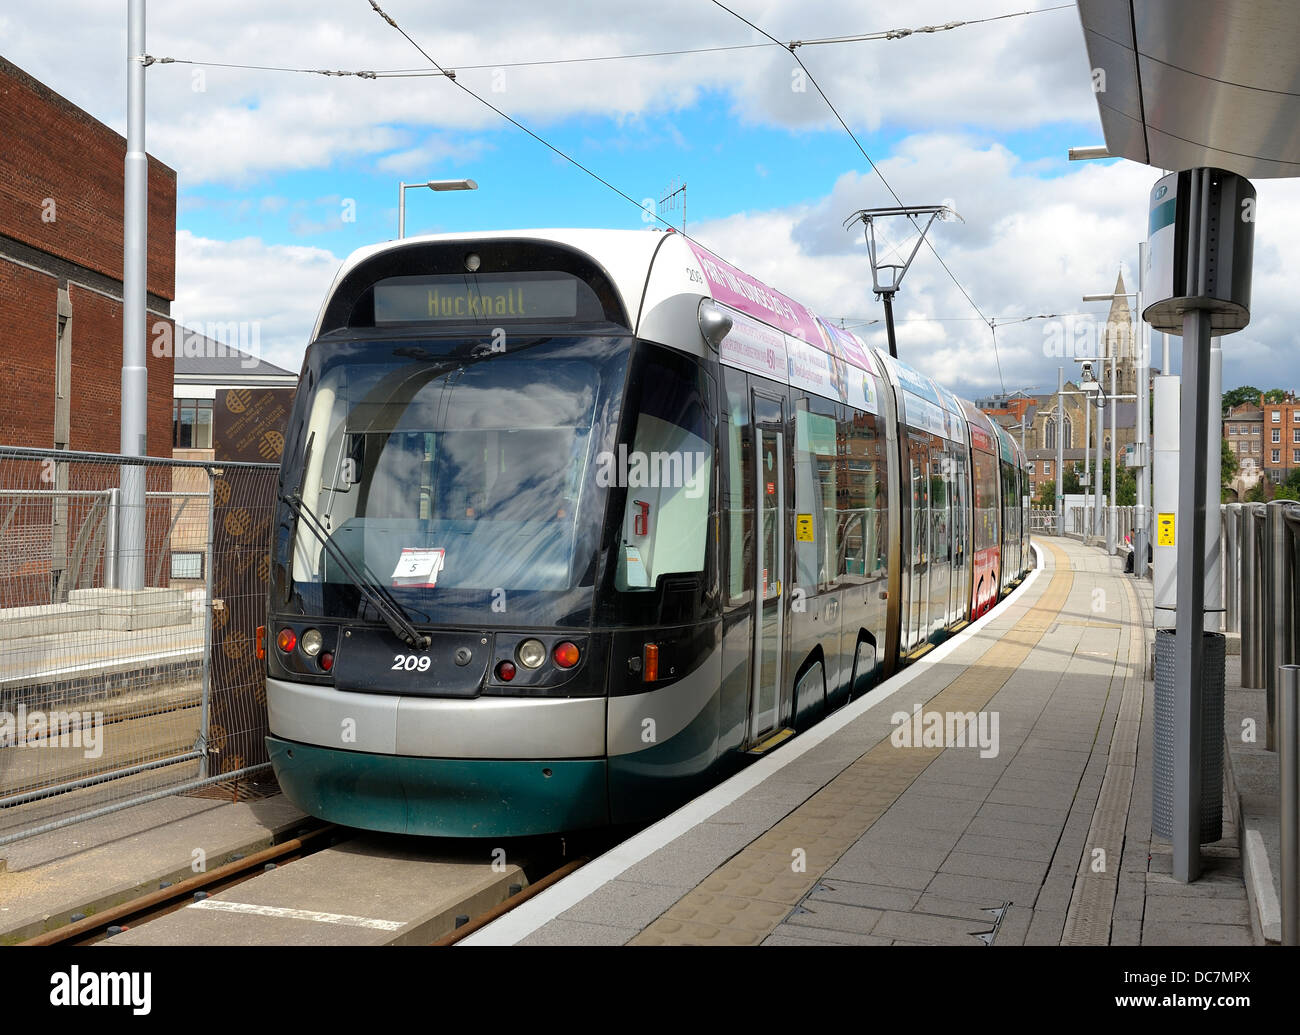 Nottingham express transit tram waiting to depart Station street with a service for Hucknall England uk Stock Photo